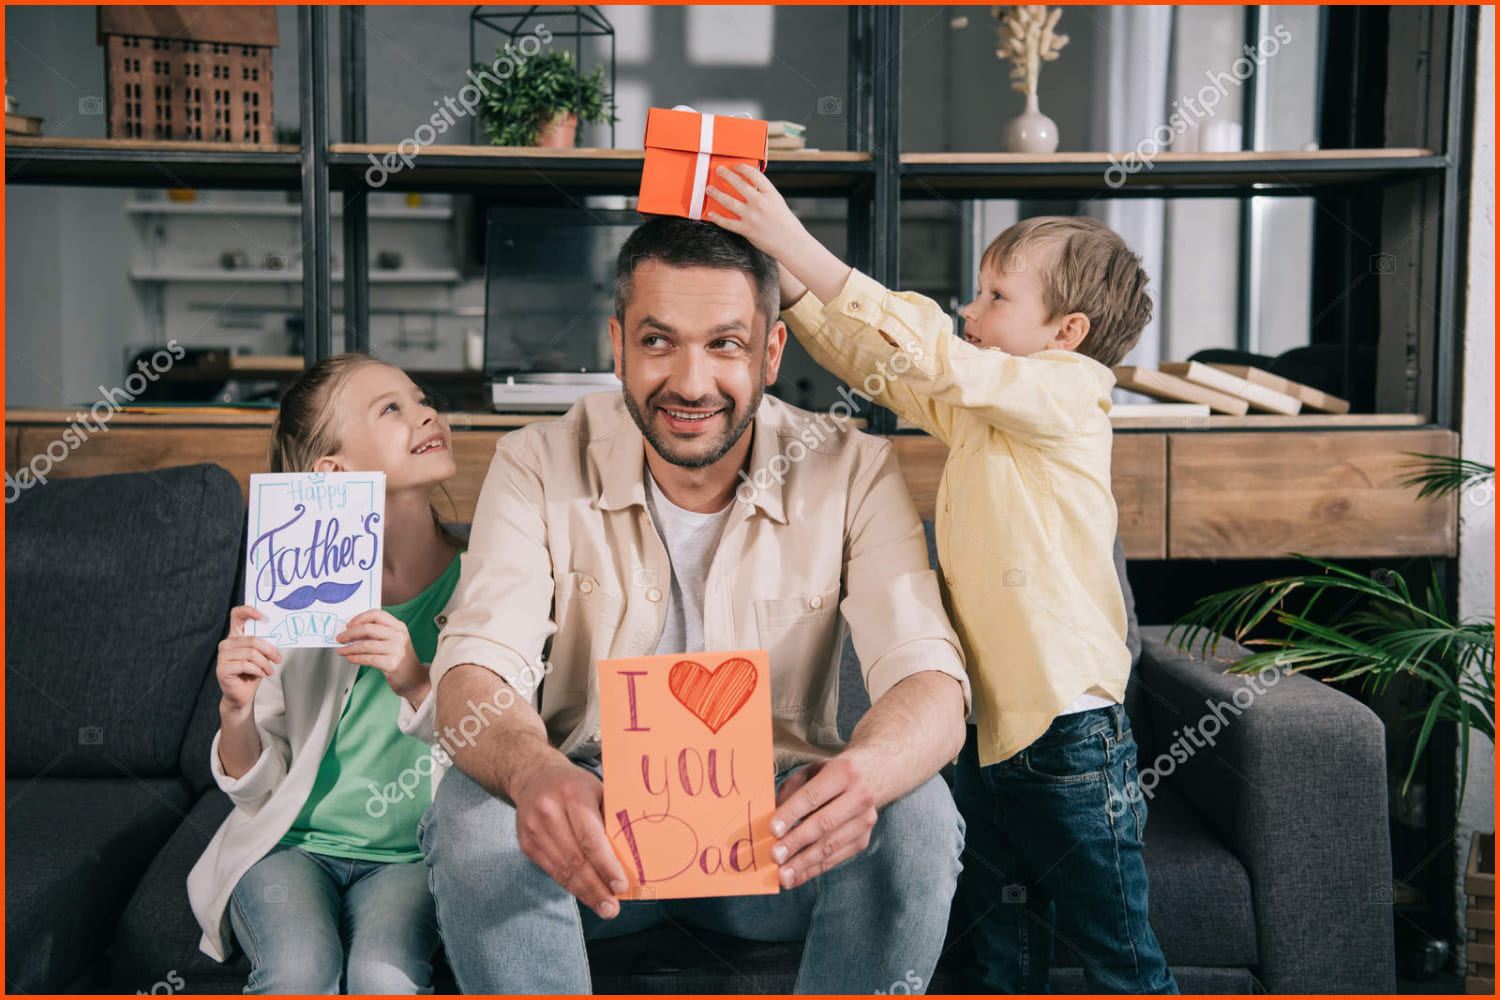 Happy kids with gifts Father's day have fun with father holding greeting card with i love you dad lettering and heart symbol.